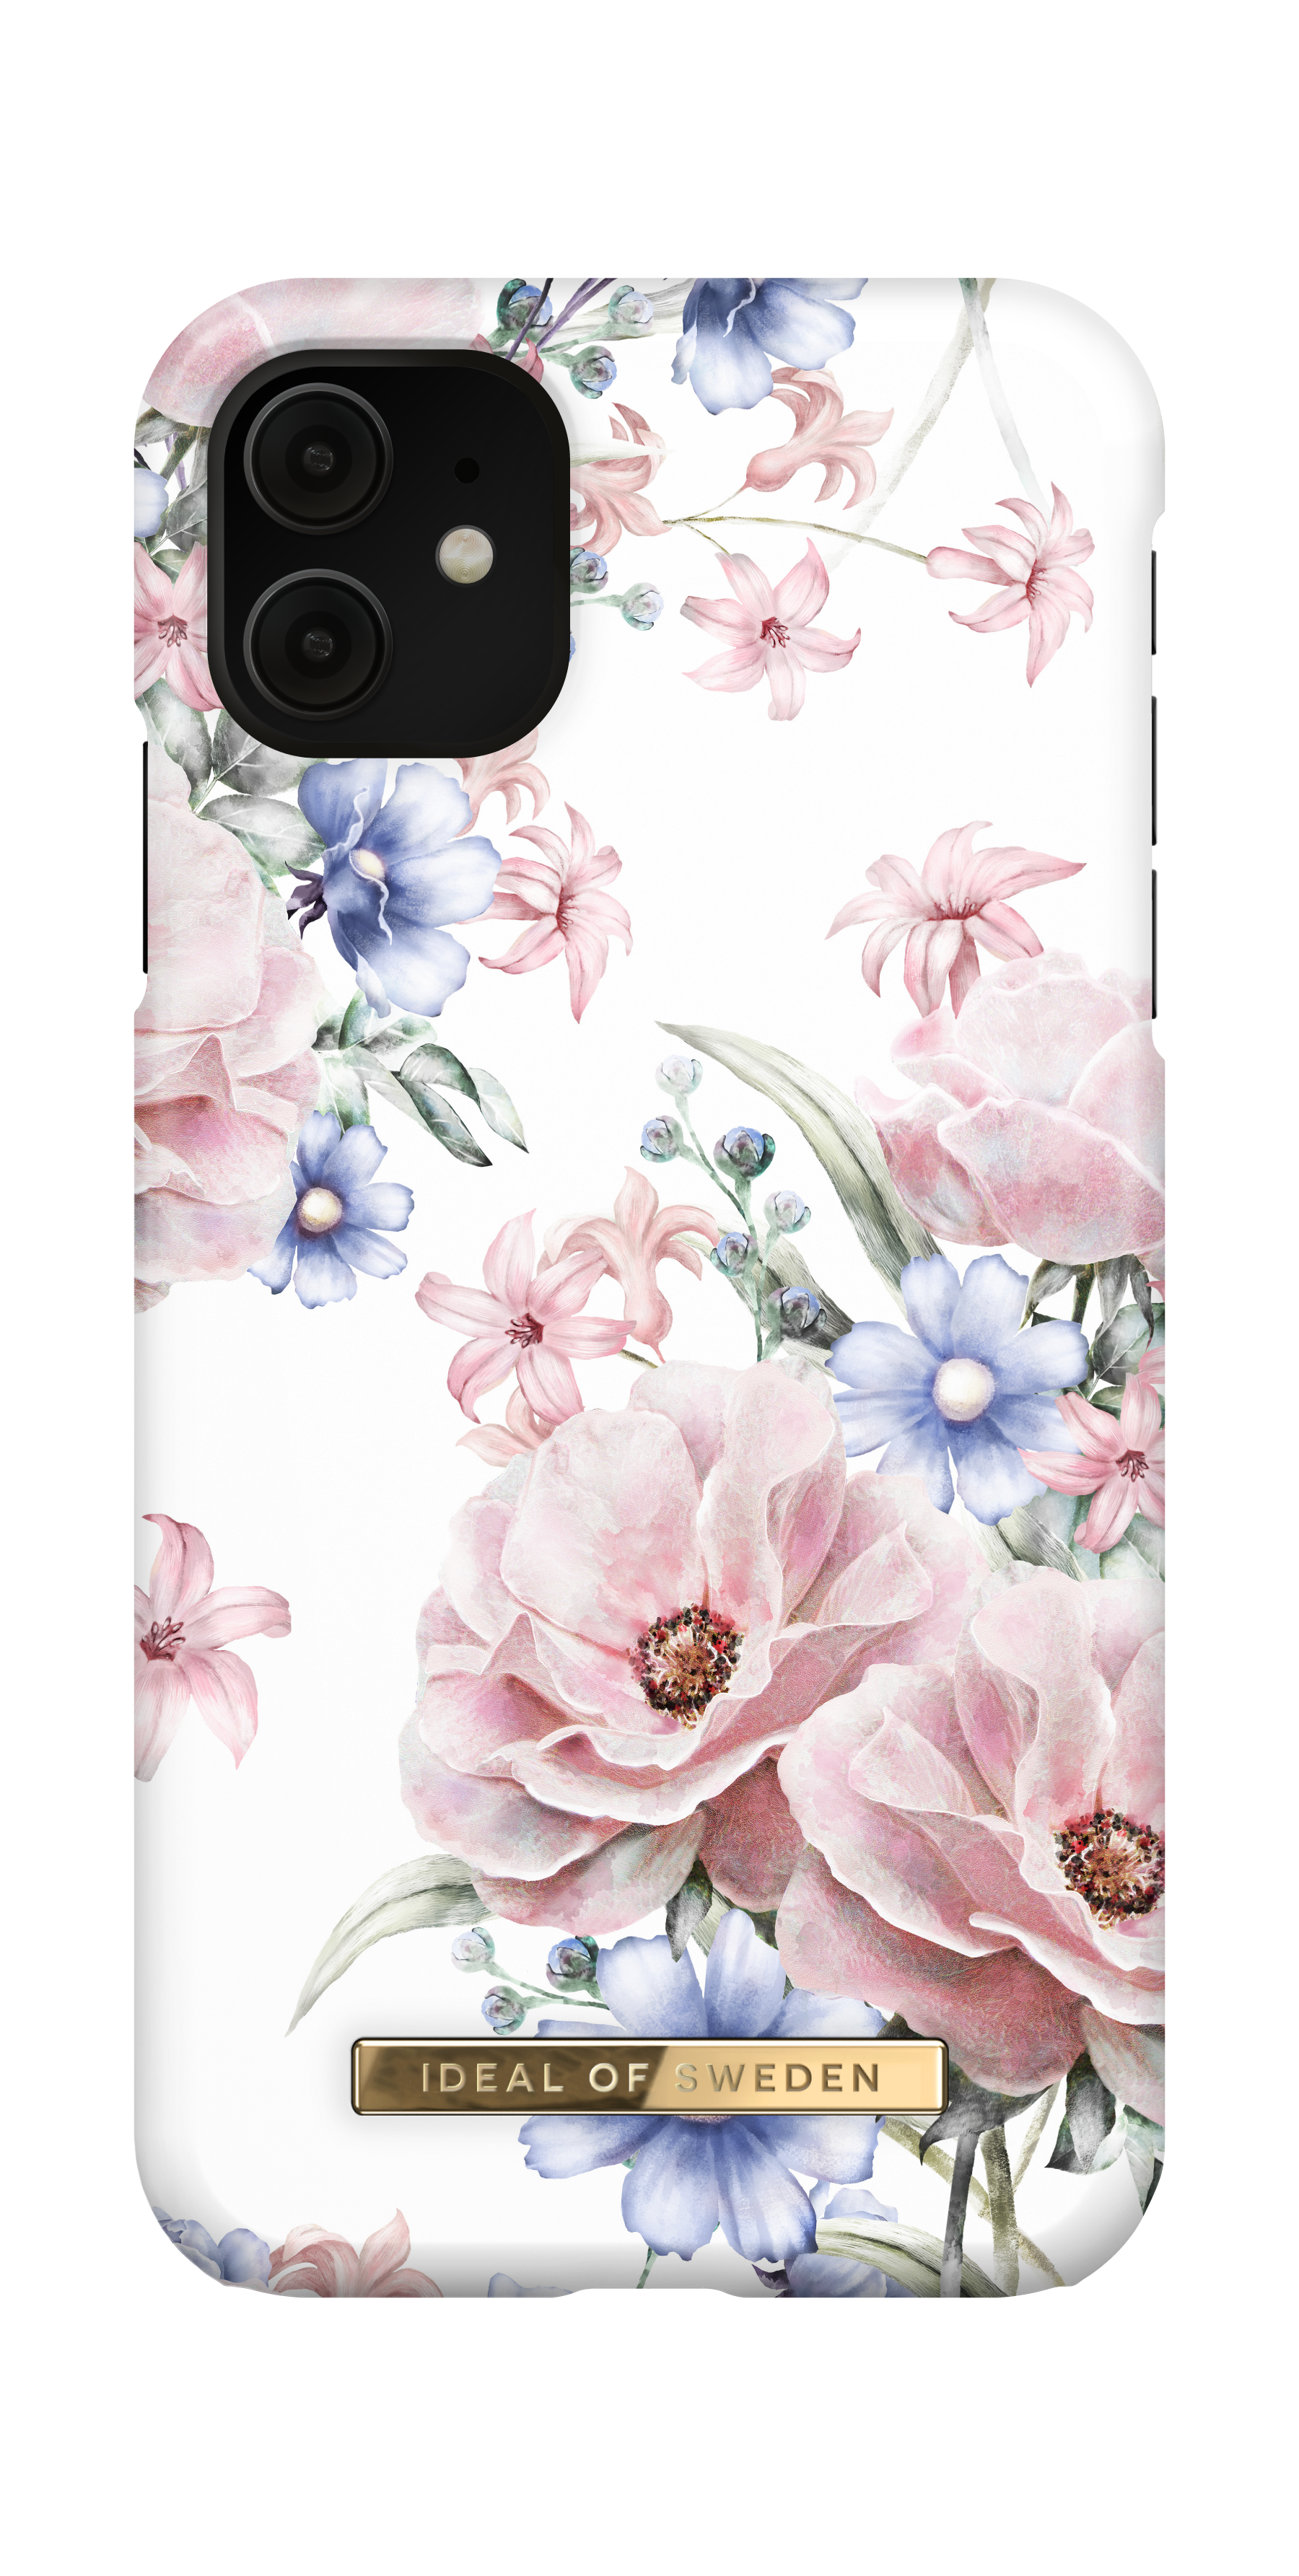 XR, IDEAL 11, SWEDEN iPhone iPhone Backcover, Apple, Romance Floral IDFCS17-I1961-58, OF